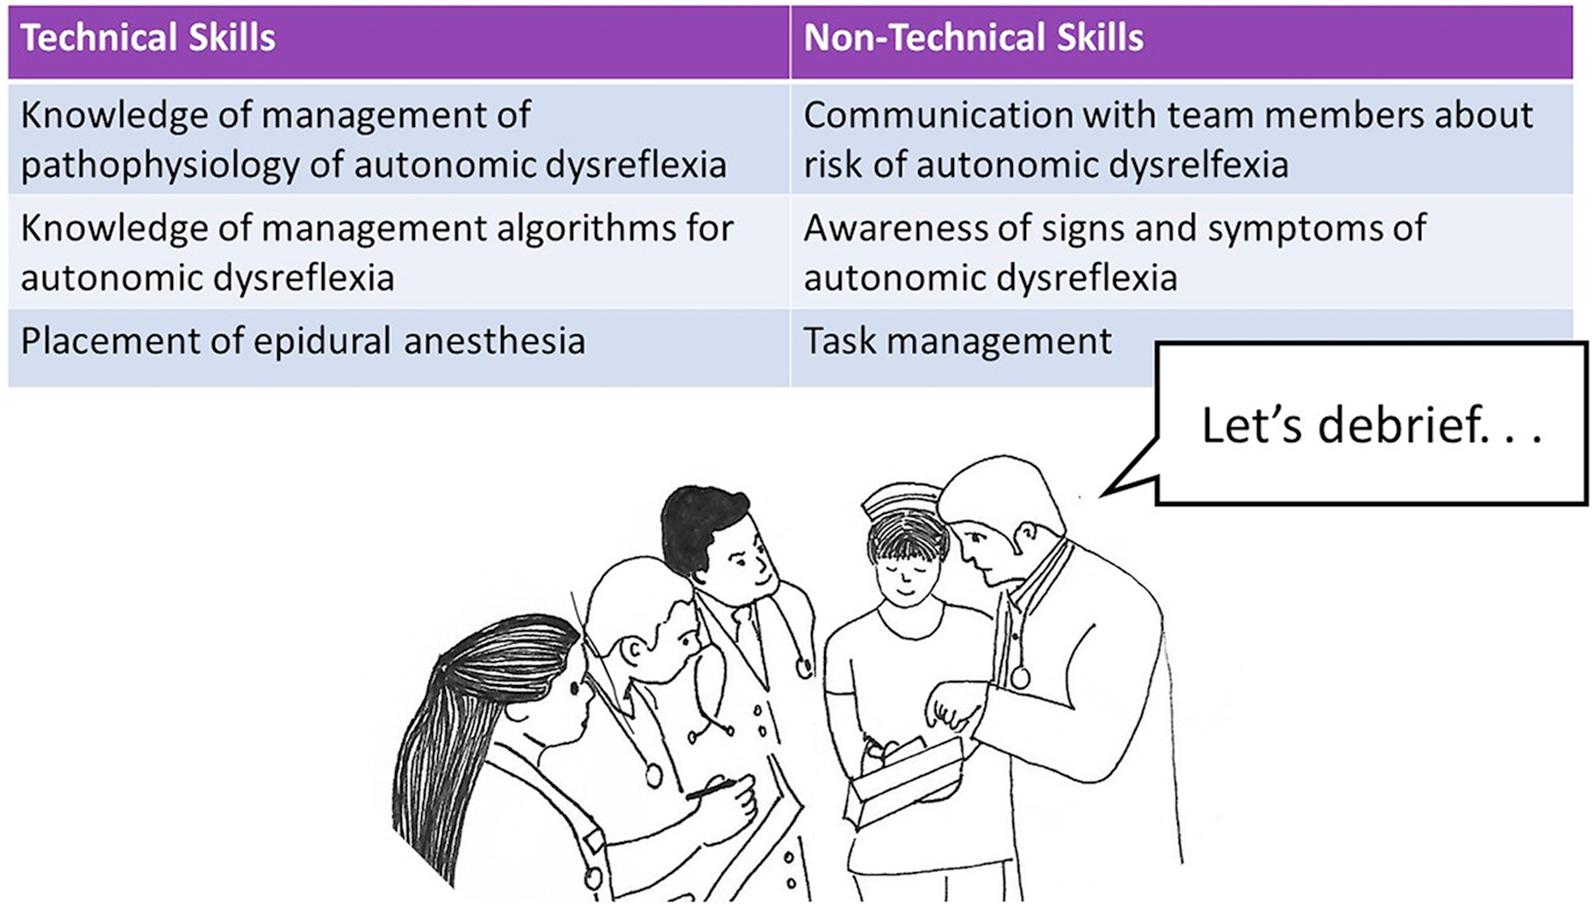 Technical and nontechnical skills for autonomic dysreflexia.